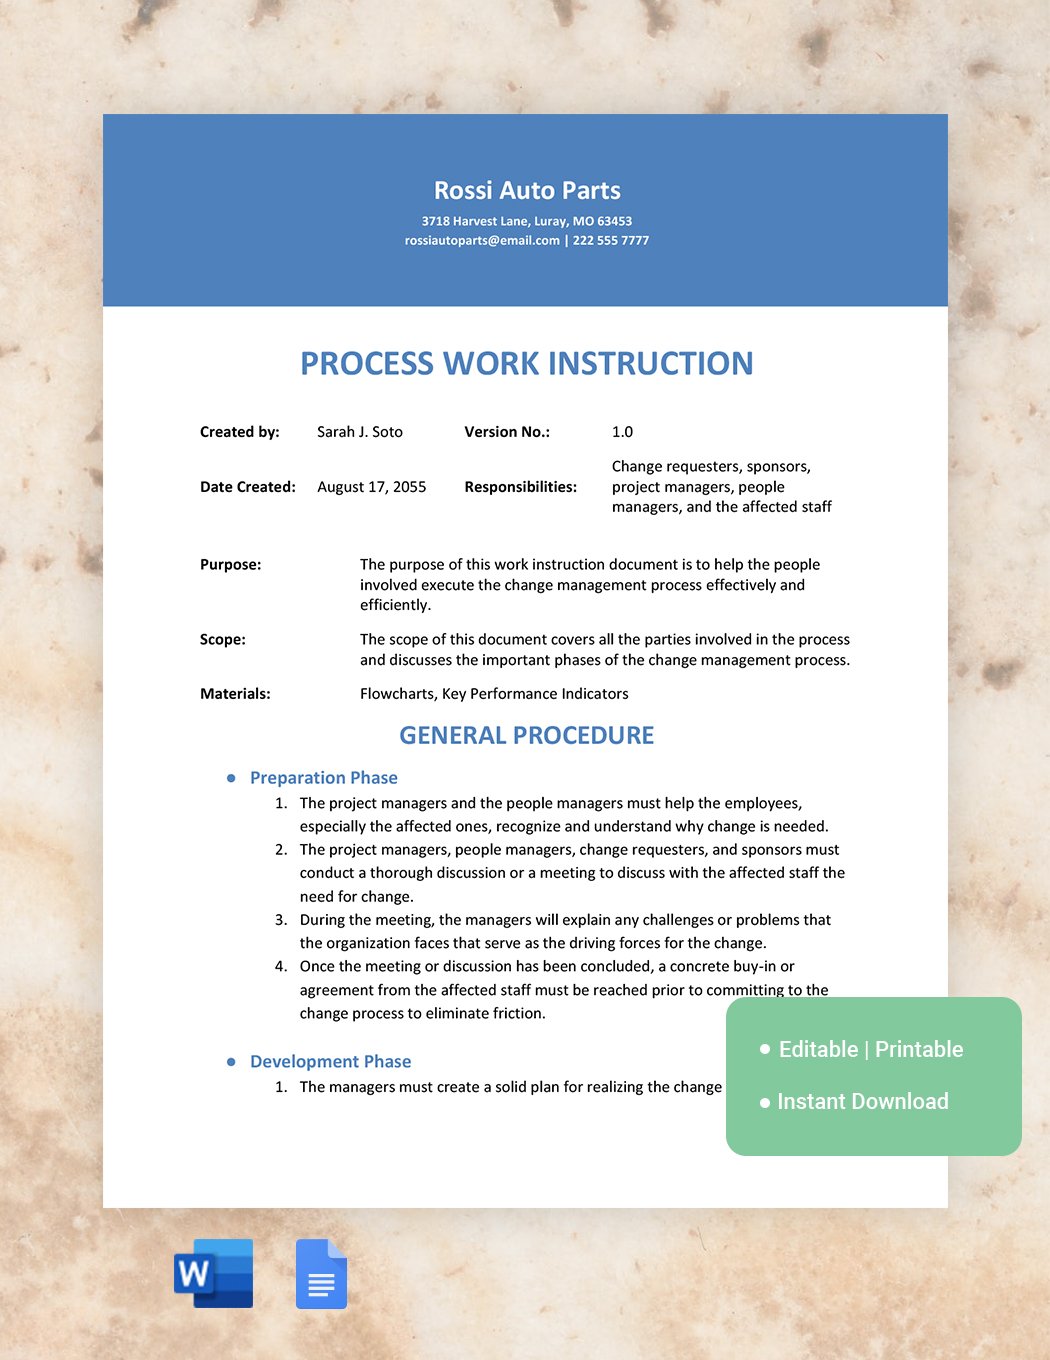 Process Work Instruction Template in Word, Google Docs